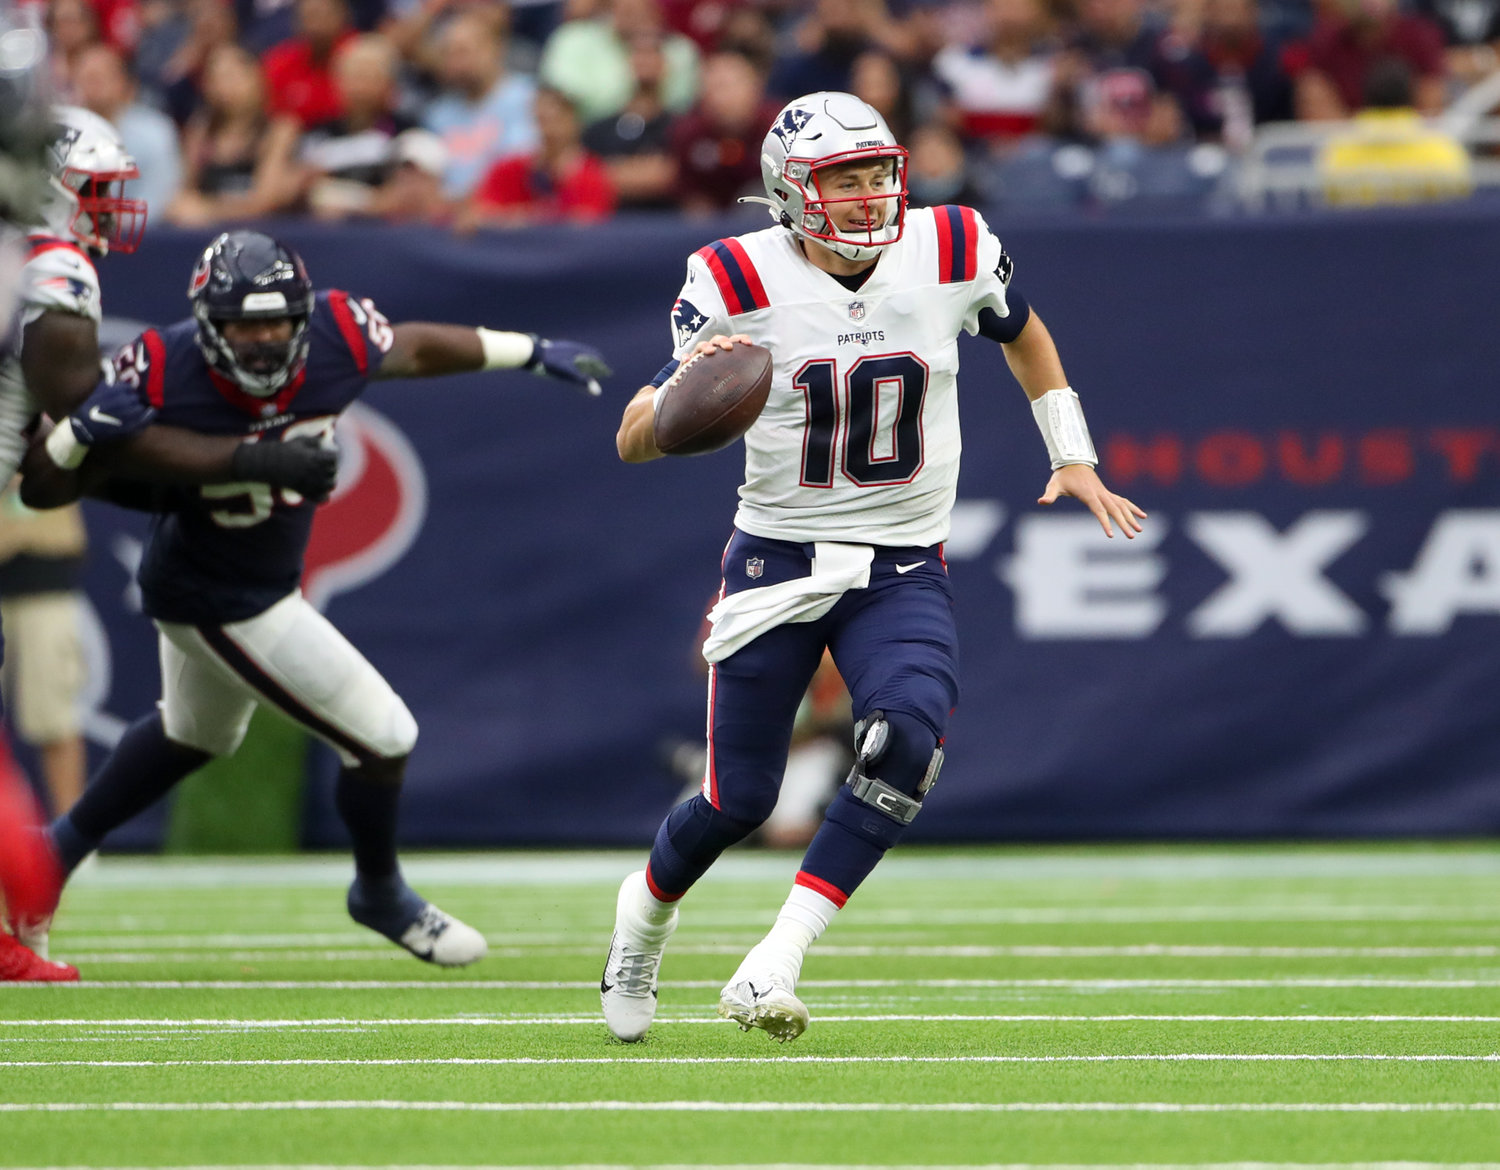 New England Patriots quarterback Mac Jones (10) escapes pressure and scrambles out of the backfield during an NFL game between Houston and New England on October 10, 2021 in Houston, Texas. The Patriots won 25-22.